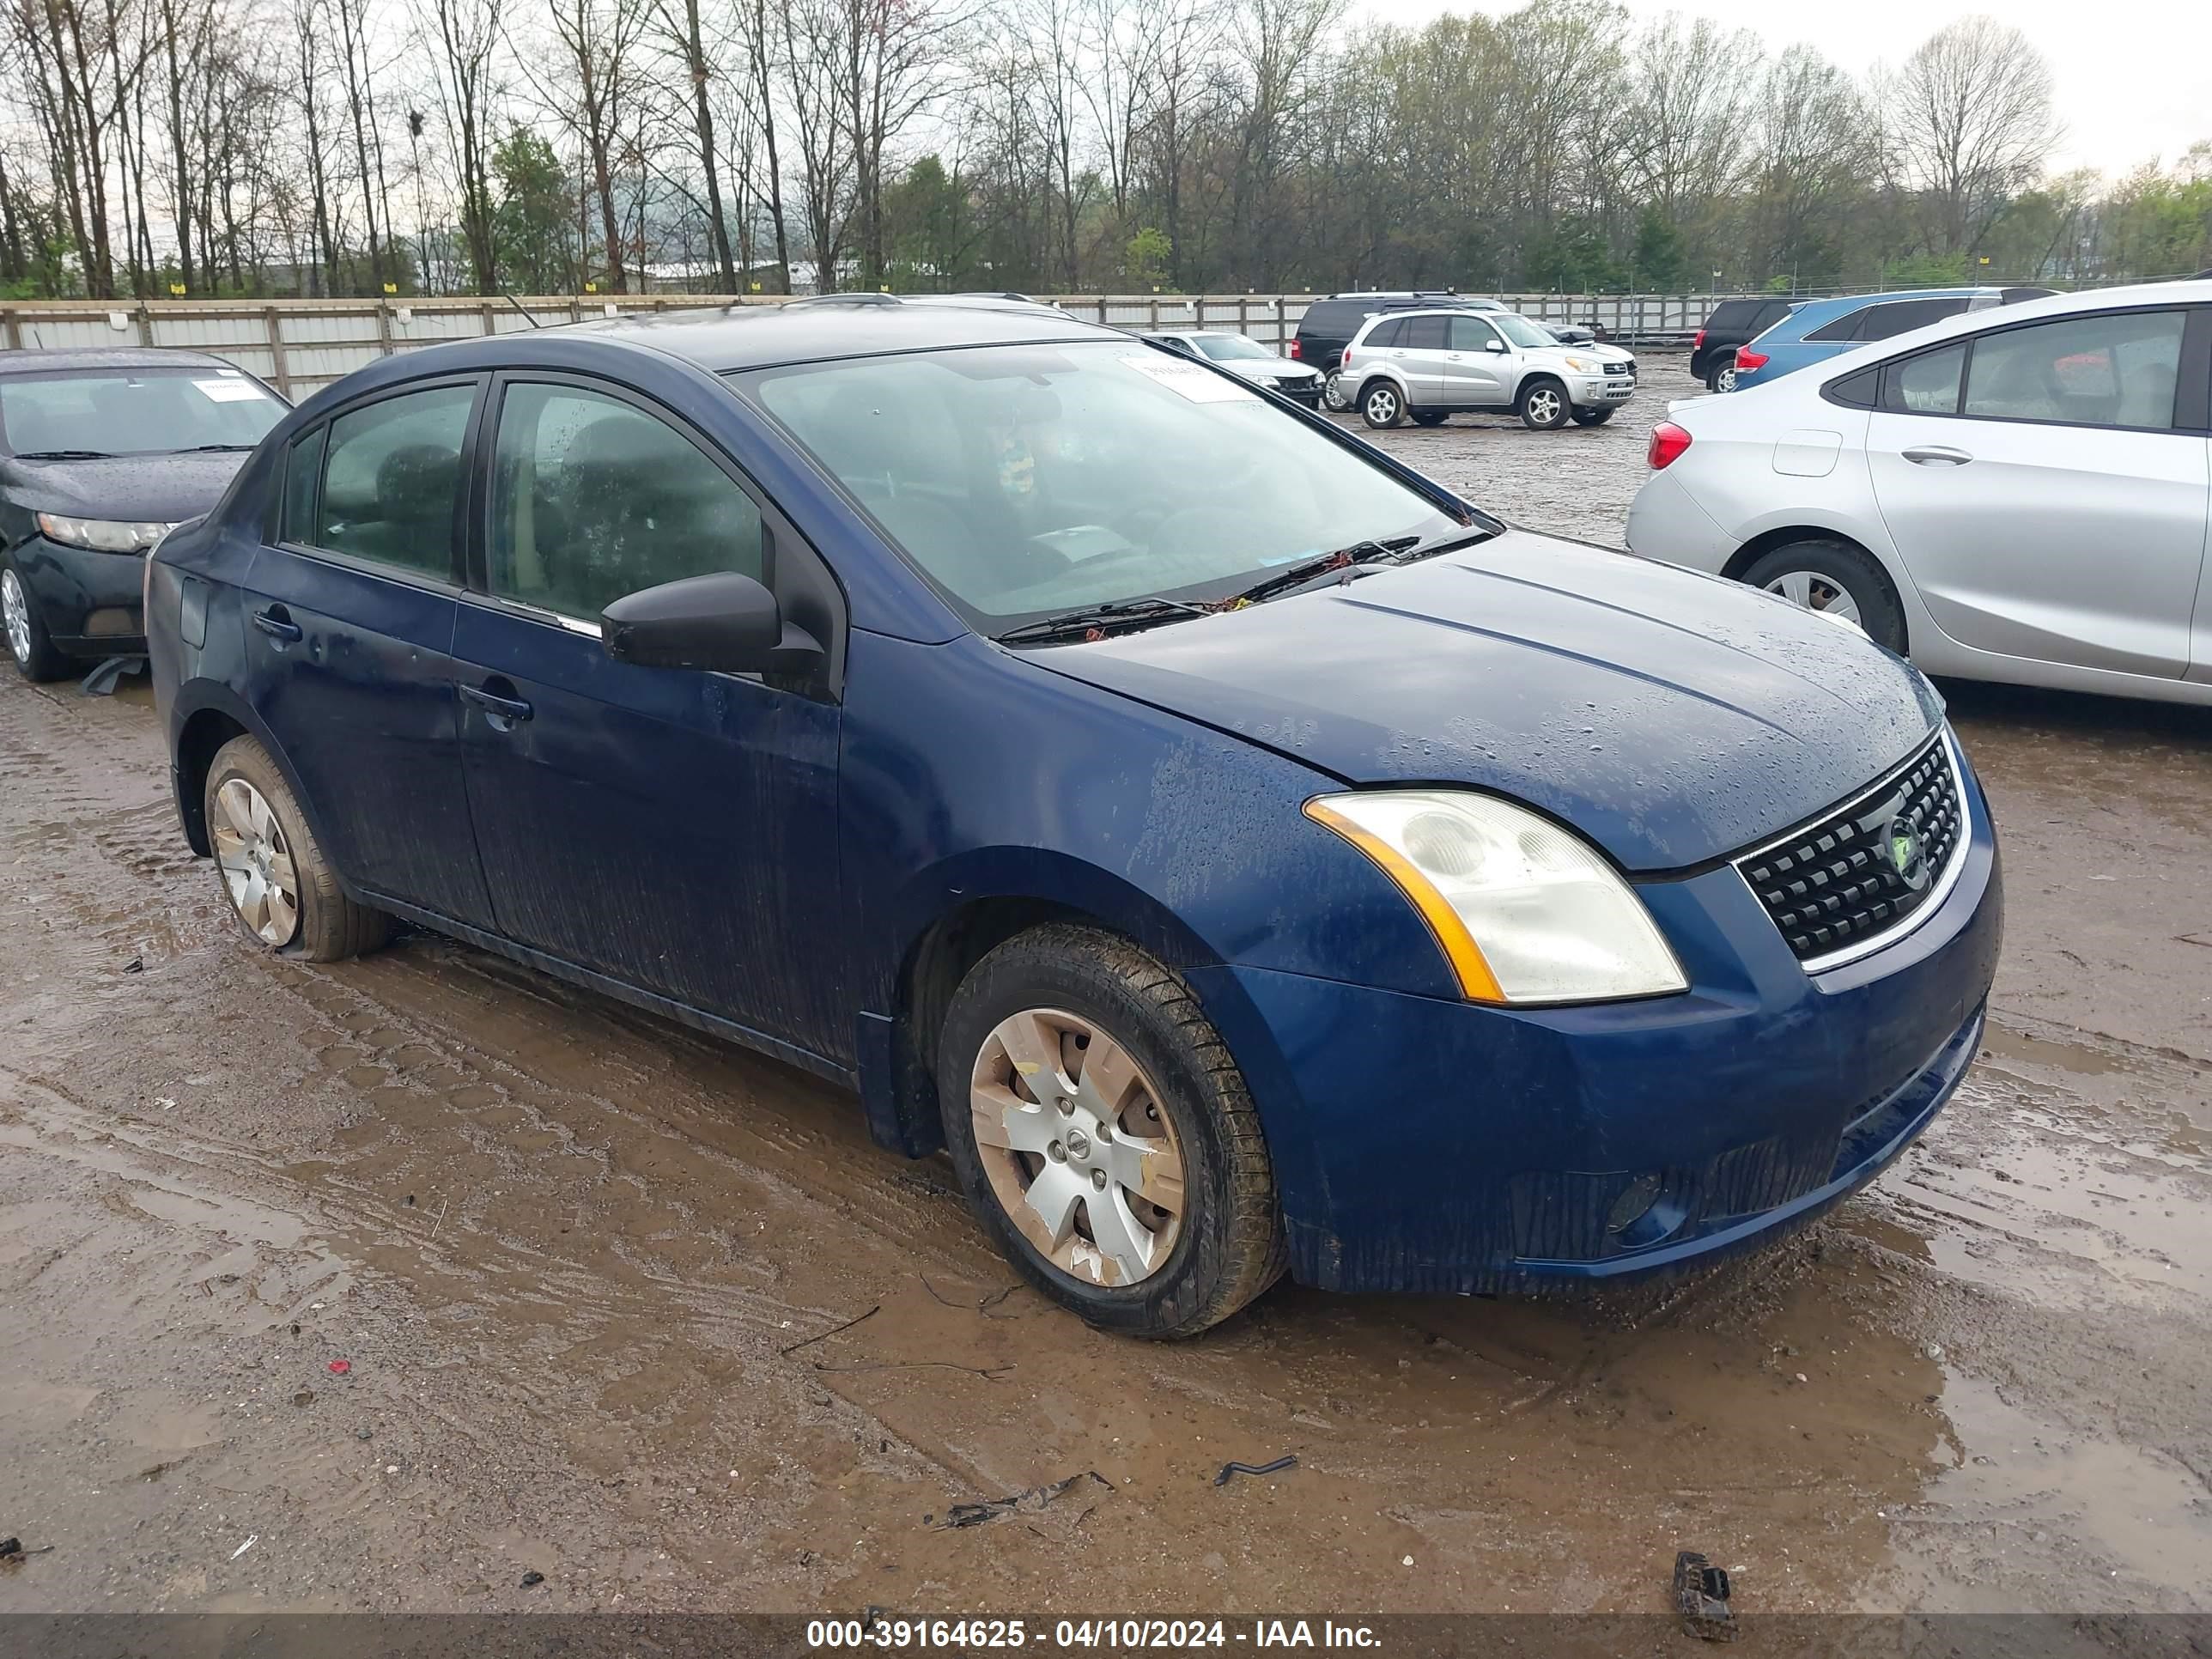 vin: 3N1AB61E69L664477 3N1AB61E69L664477 2009 nissan sentra 2000 for Sale in 37914, 3634 E. Governor John Sevier Hwy, Knoxville, Tennessee, USA